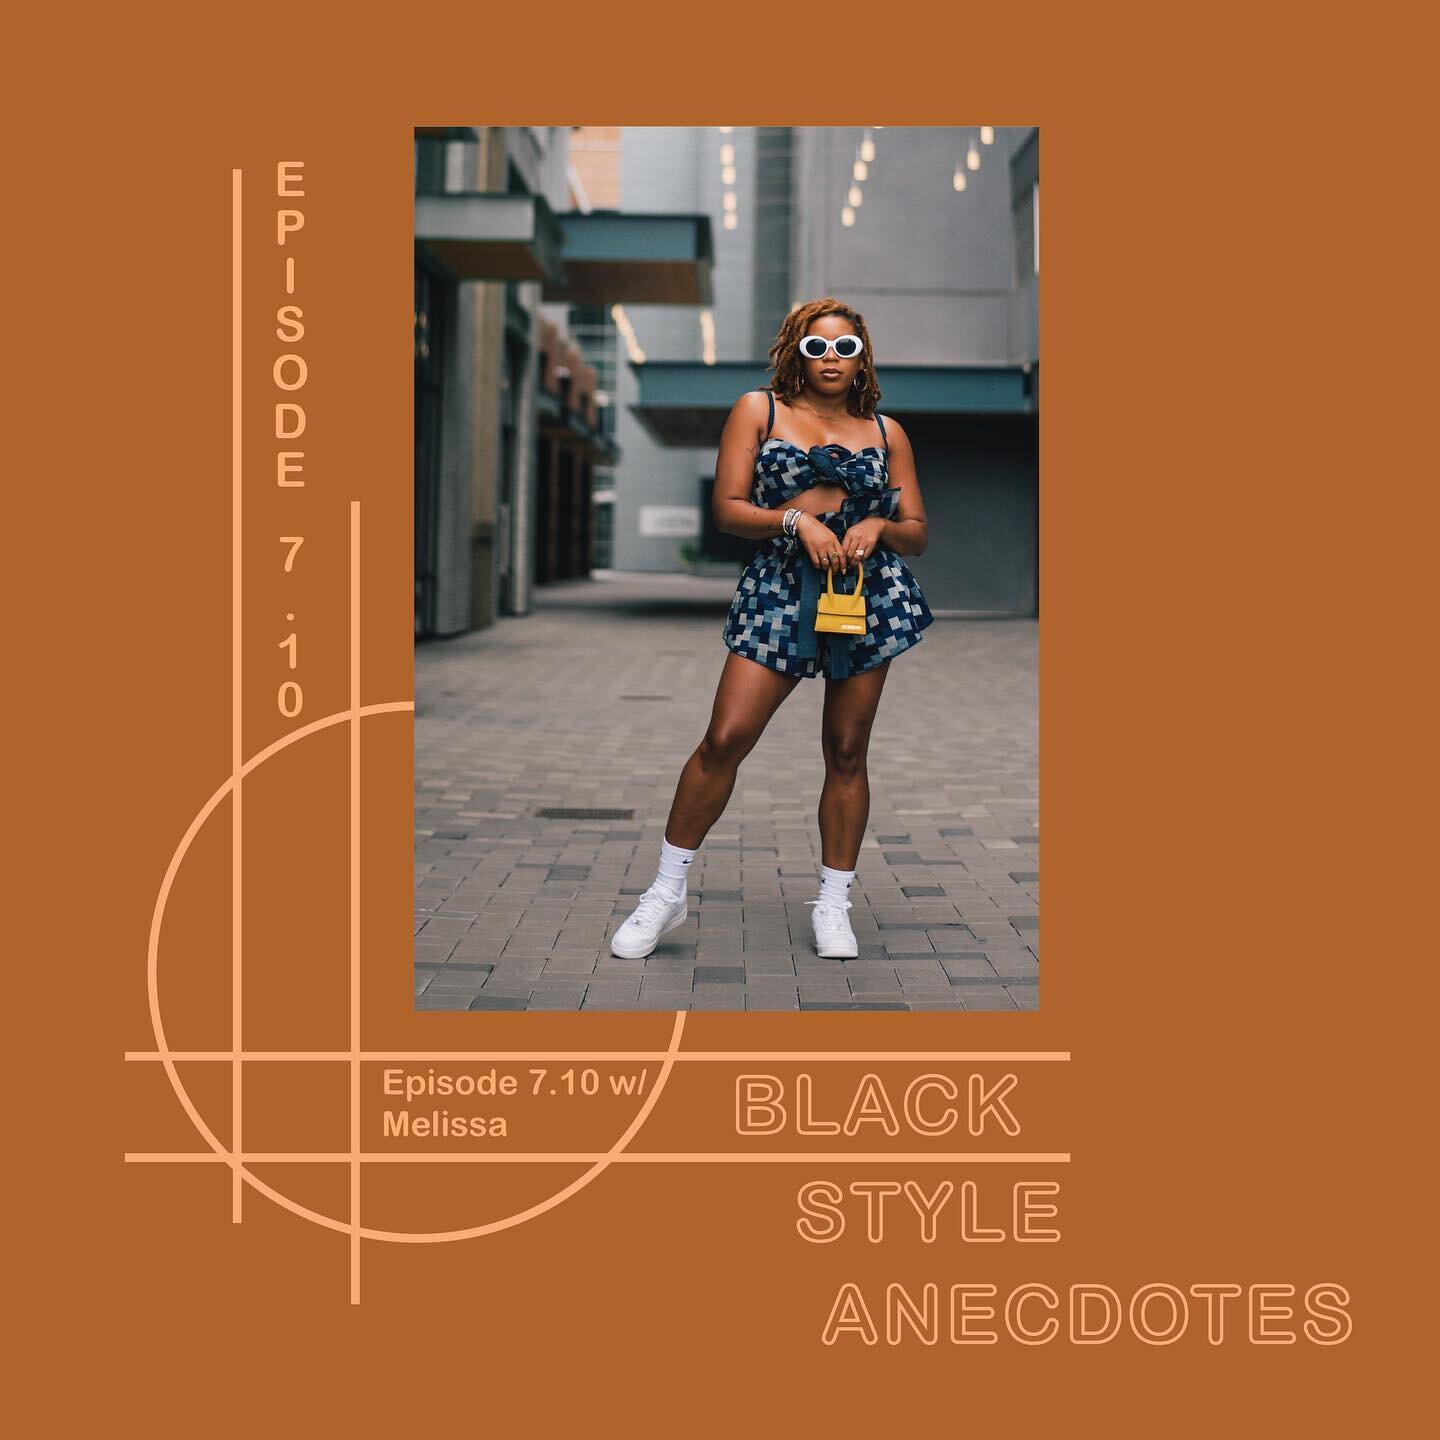 Happy Thursday dears! I can&rsquo;t believe the final episode of Black Style Anecdotes&rsquo; 7th season has dropped today!

In this season finale episode, I speak with @melissachanel of @kicksandfros about her tomboy chic style, doing at home fashio